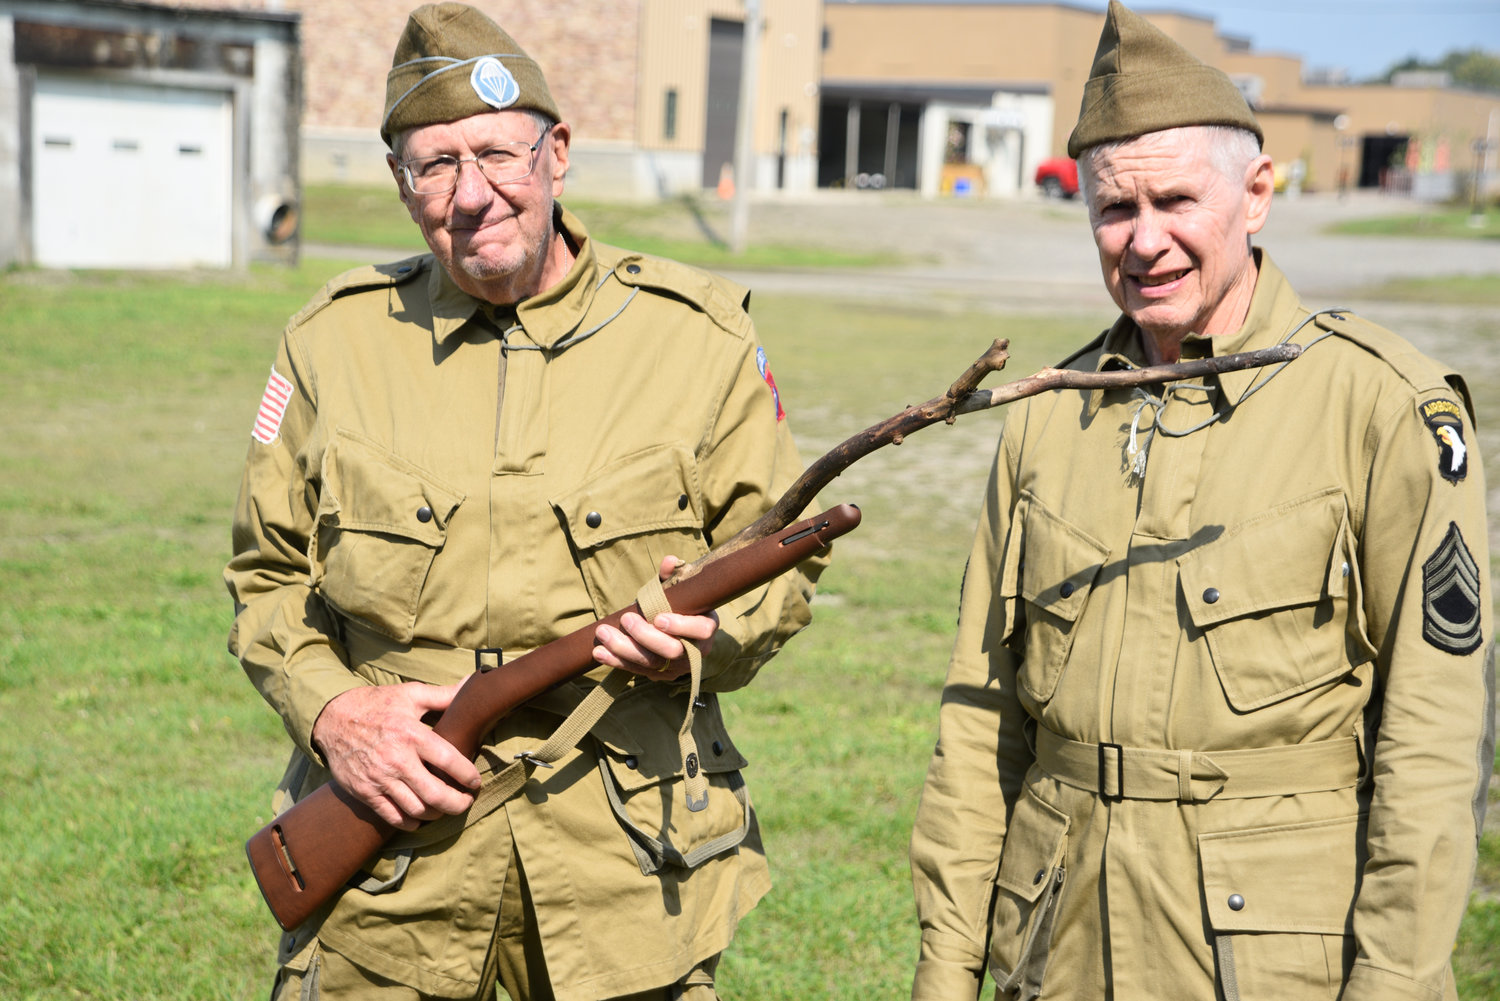 World War II reenactors Dan O’Brien of Chenango Bridge, left, and Kenny Gow of Binghamton placed a stick in a rifle stock to mock the state’s recently amended concealed carry law, which they say bans them from using inoperable weapons during encampments.